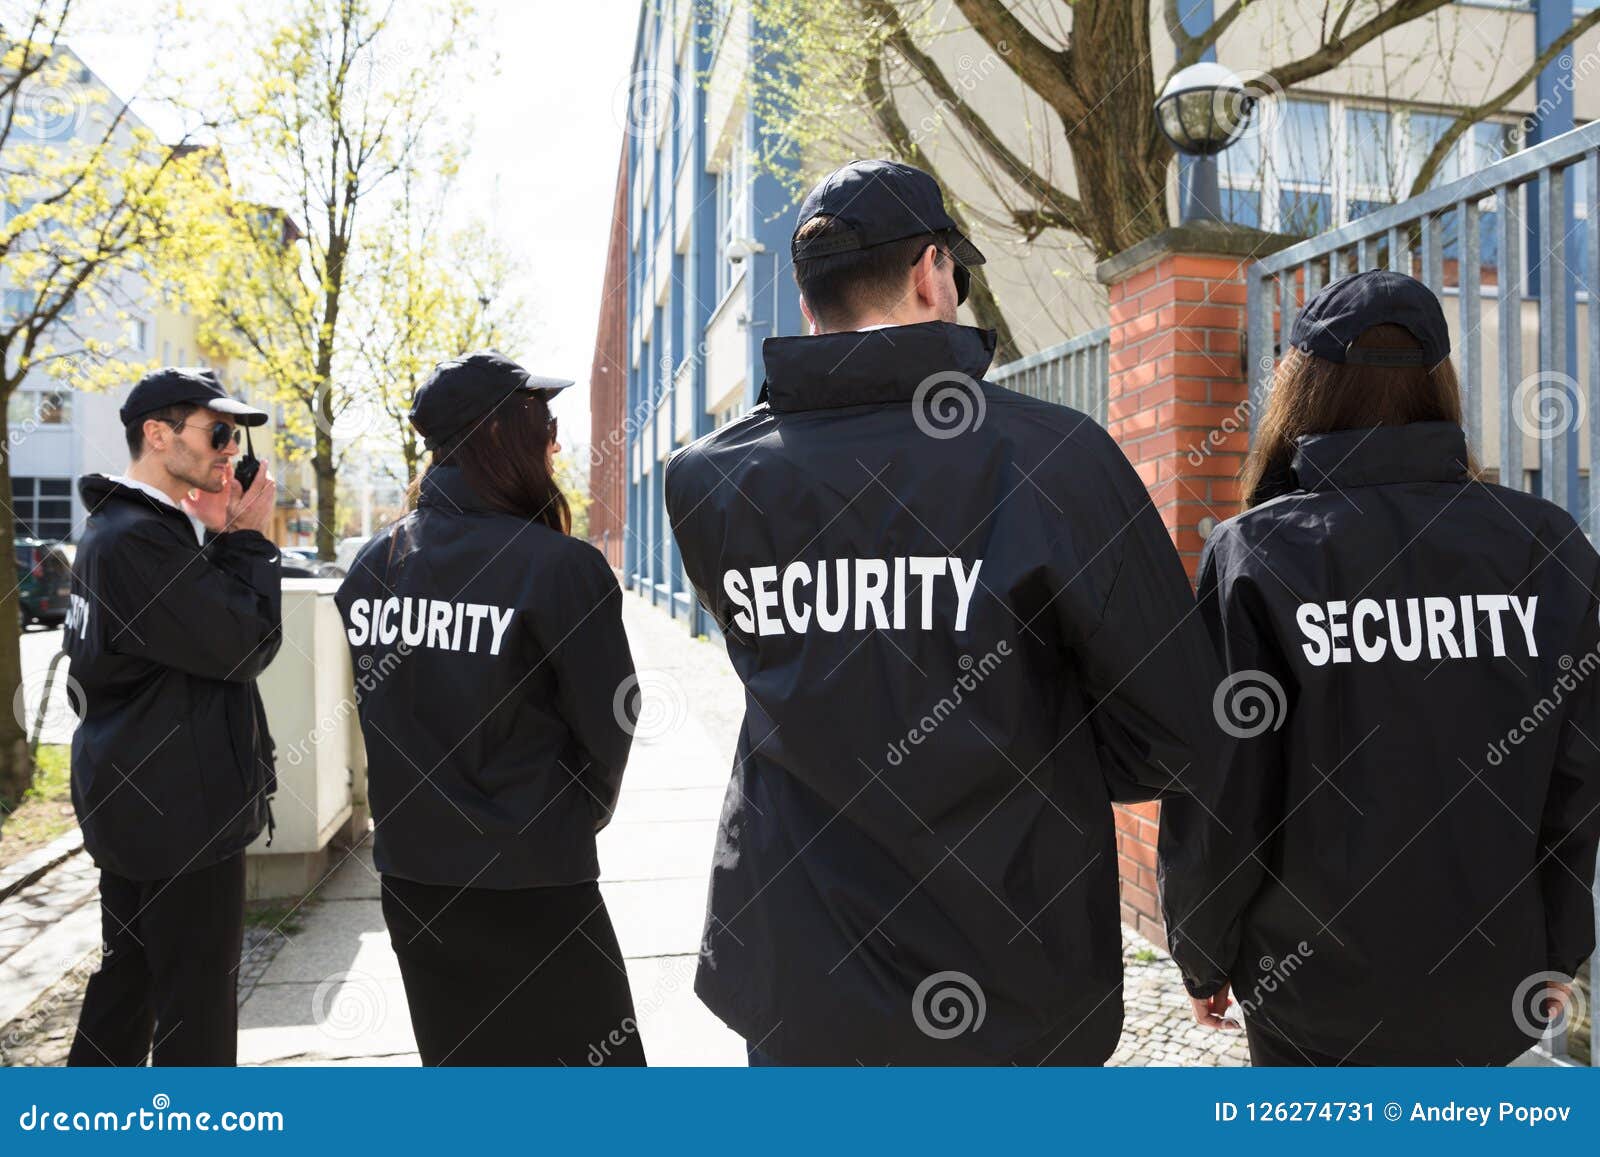 security guards standing outside building